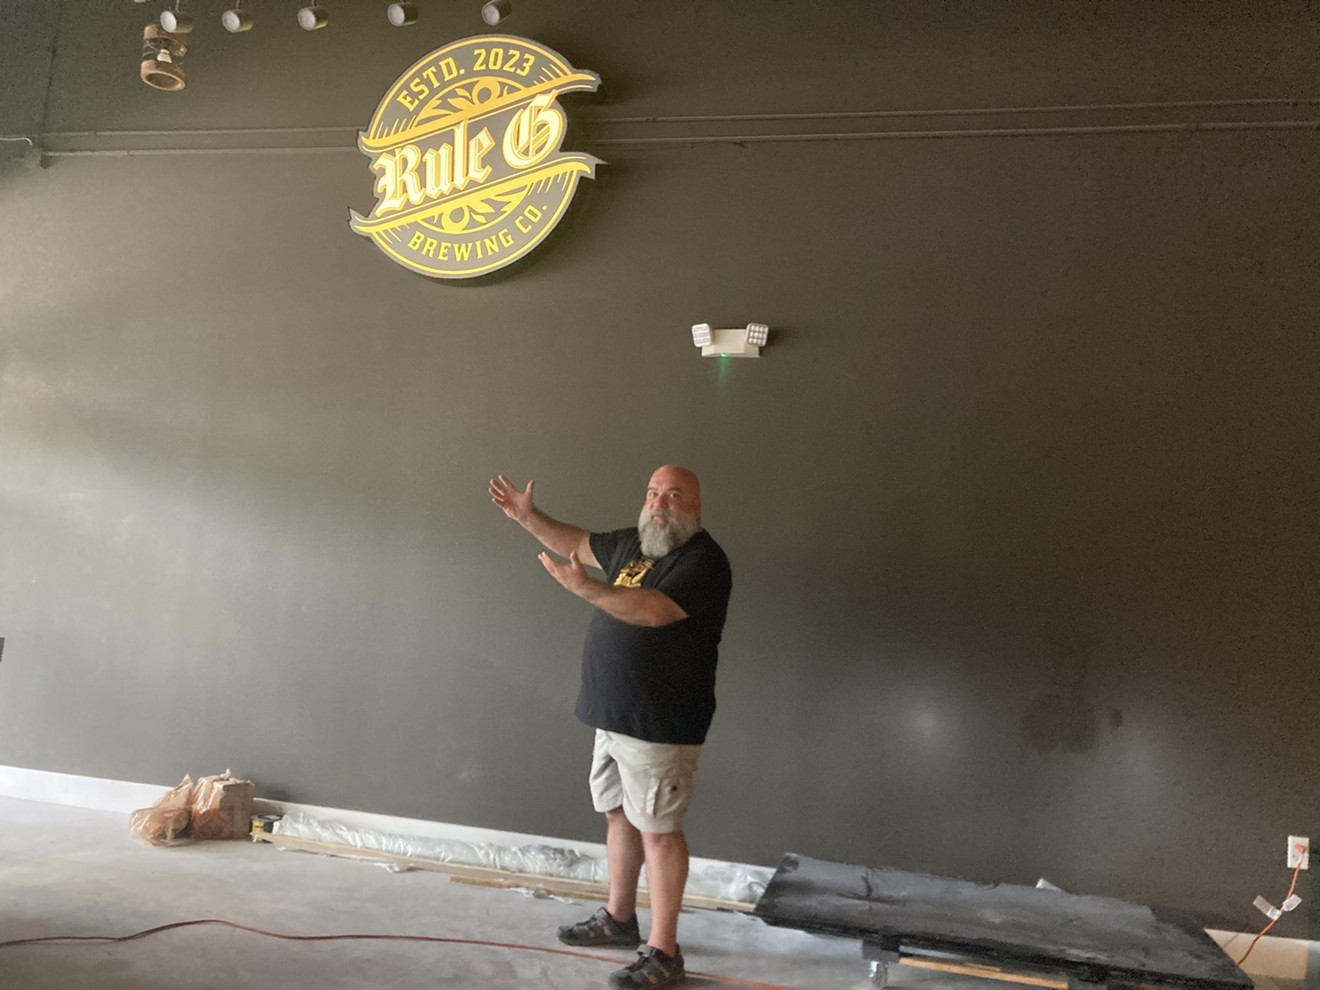 Rule G Brewing Company owner Ralph Rapa shows off an illuminated sign of his brewery during construction in October 2023.